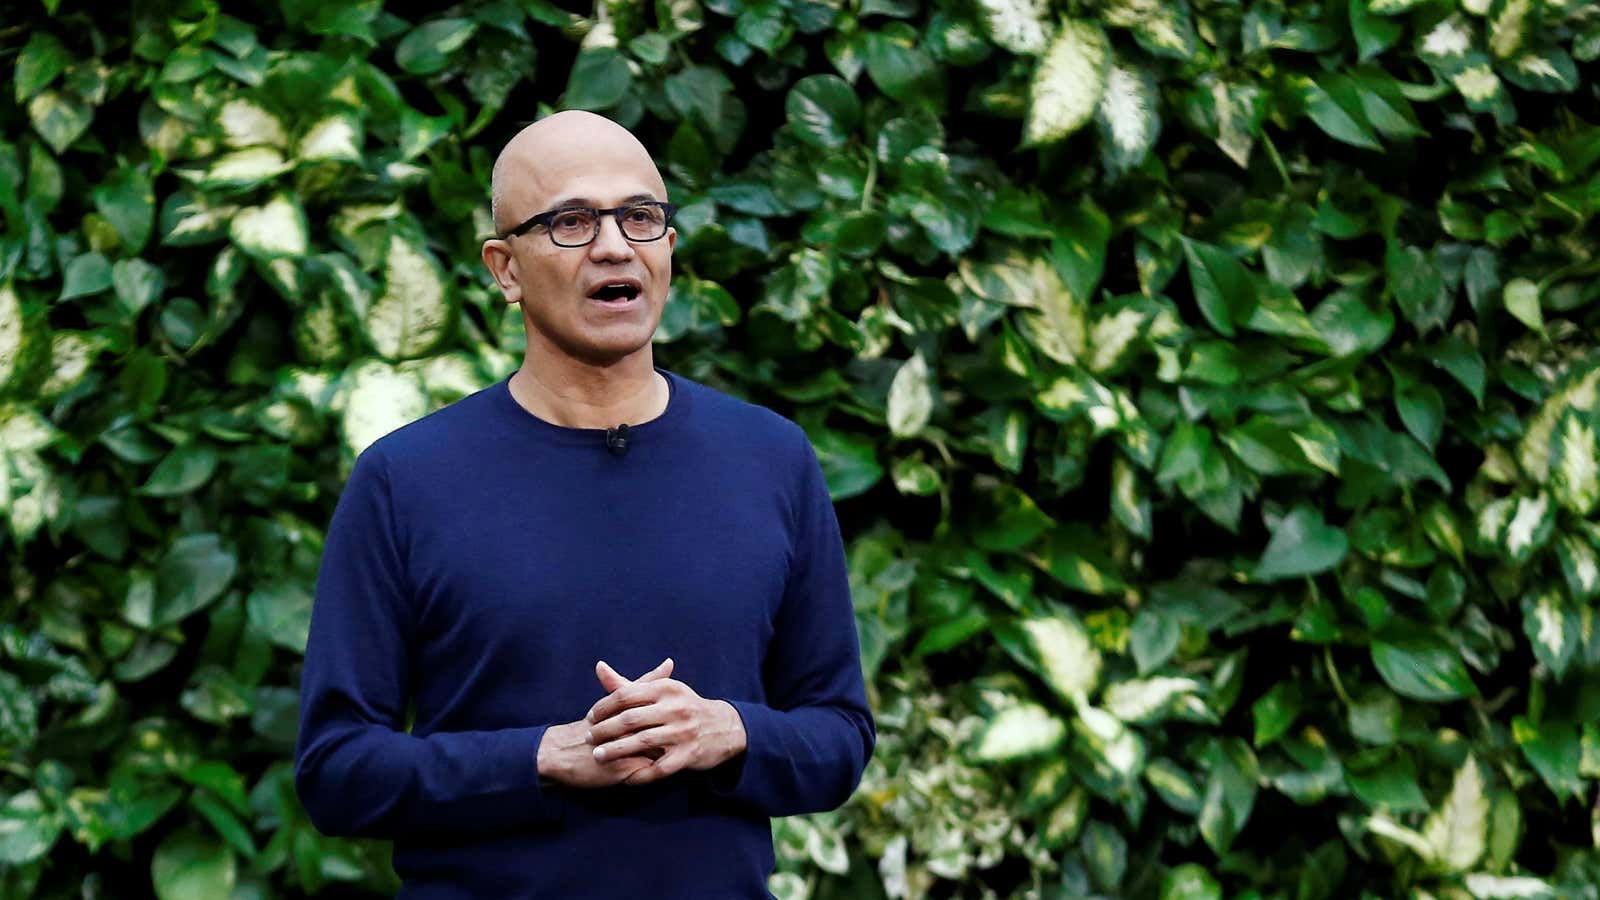 Microsoft CEO Satya Nadella is going as green as can be.